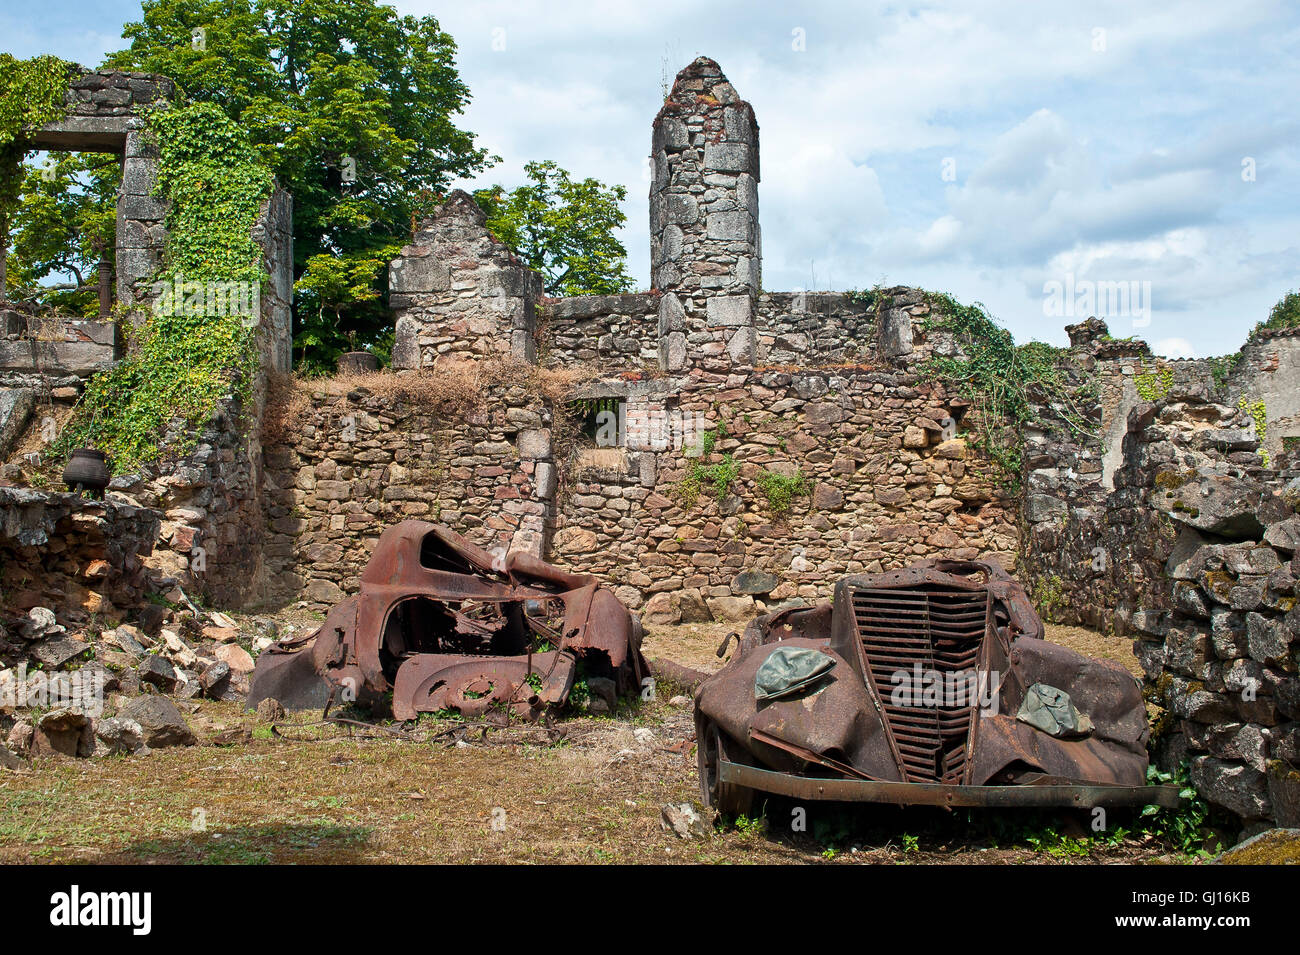 the village of Oradour-sur-Glane in Haute-Vienne in previously Nazi-occupied France, destroyed on 10 June 1944, when 642 of its inhabitants, including Stock Photo